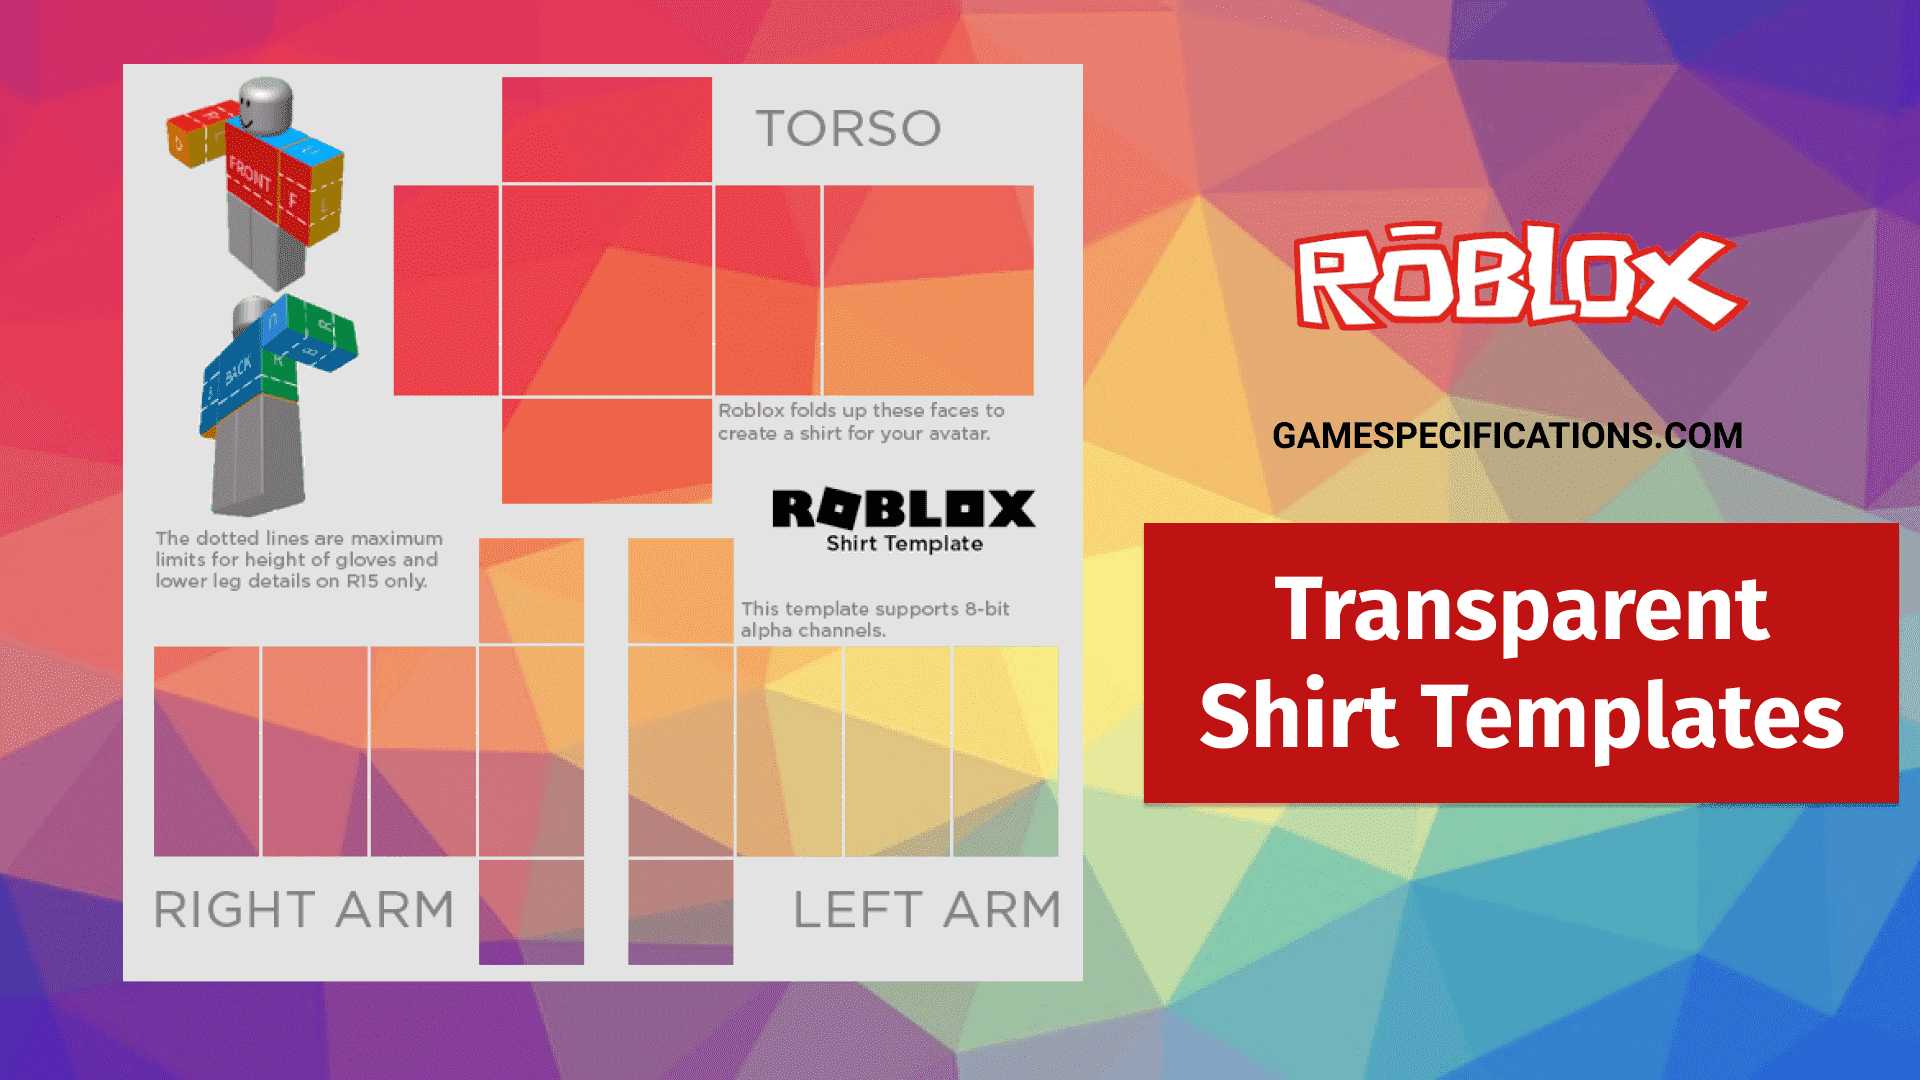 Roblox Transparent Shirt Templates And How To Make Them Game Specifications - roblox shirt template transparent black